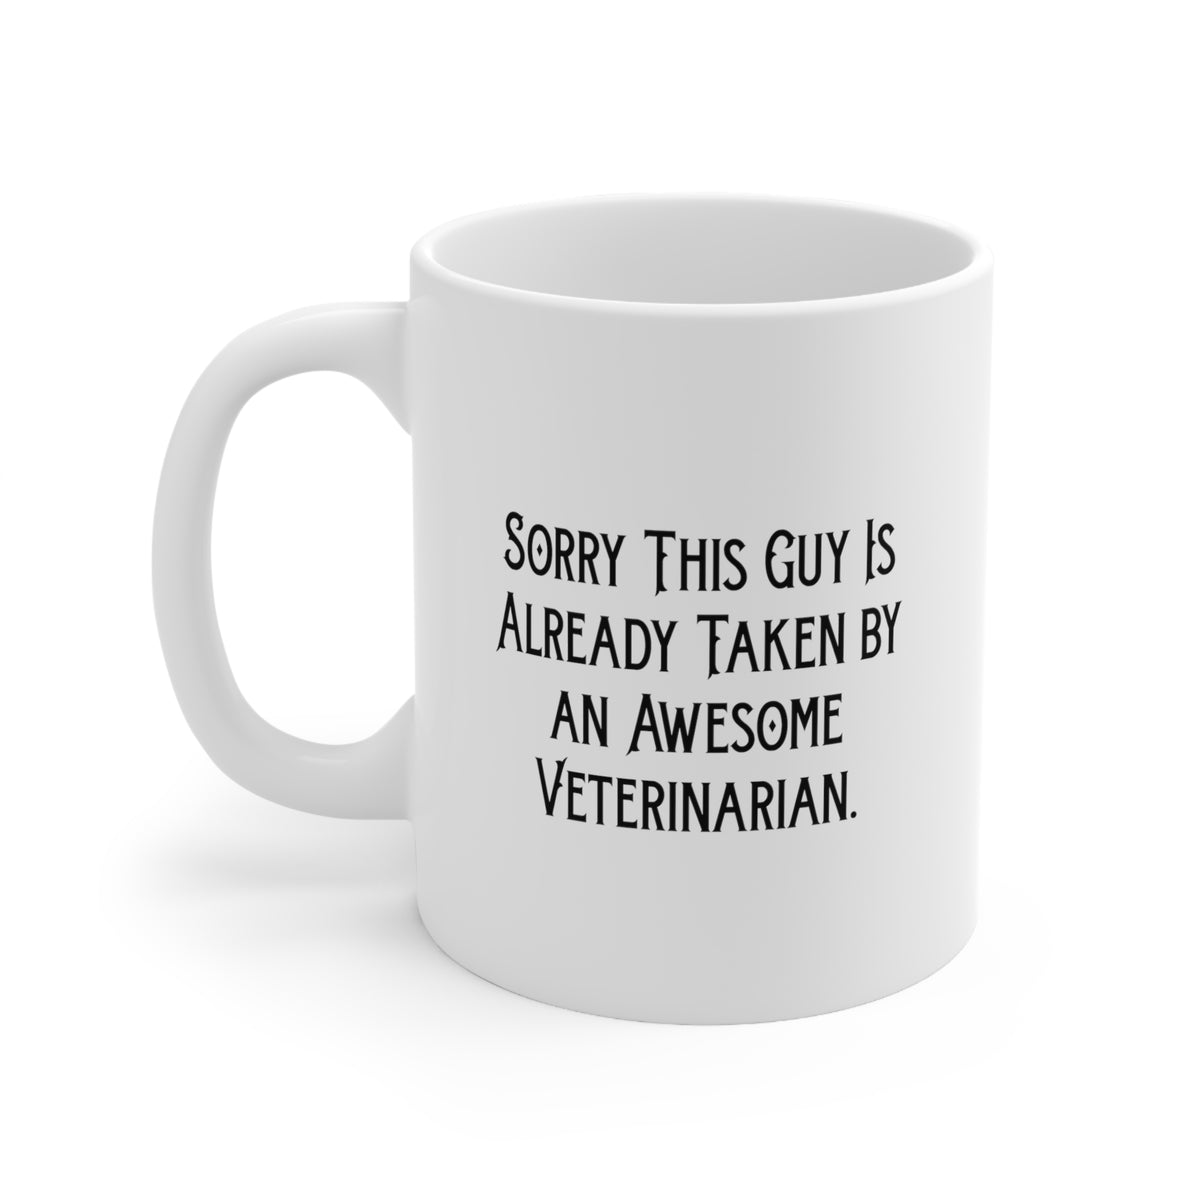 Fun Veterinarian Gifts, Sorry This Guy Is Already Taken by an Awesome, Graduation 11oz 15oz Mug For Veterinarian from Boss, Dog lover gifts, Cat lover gifts, Veterinary supplies, Pet supplies